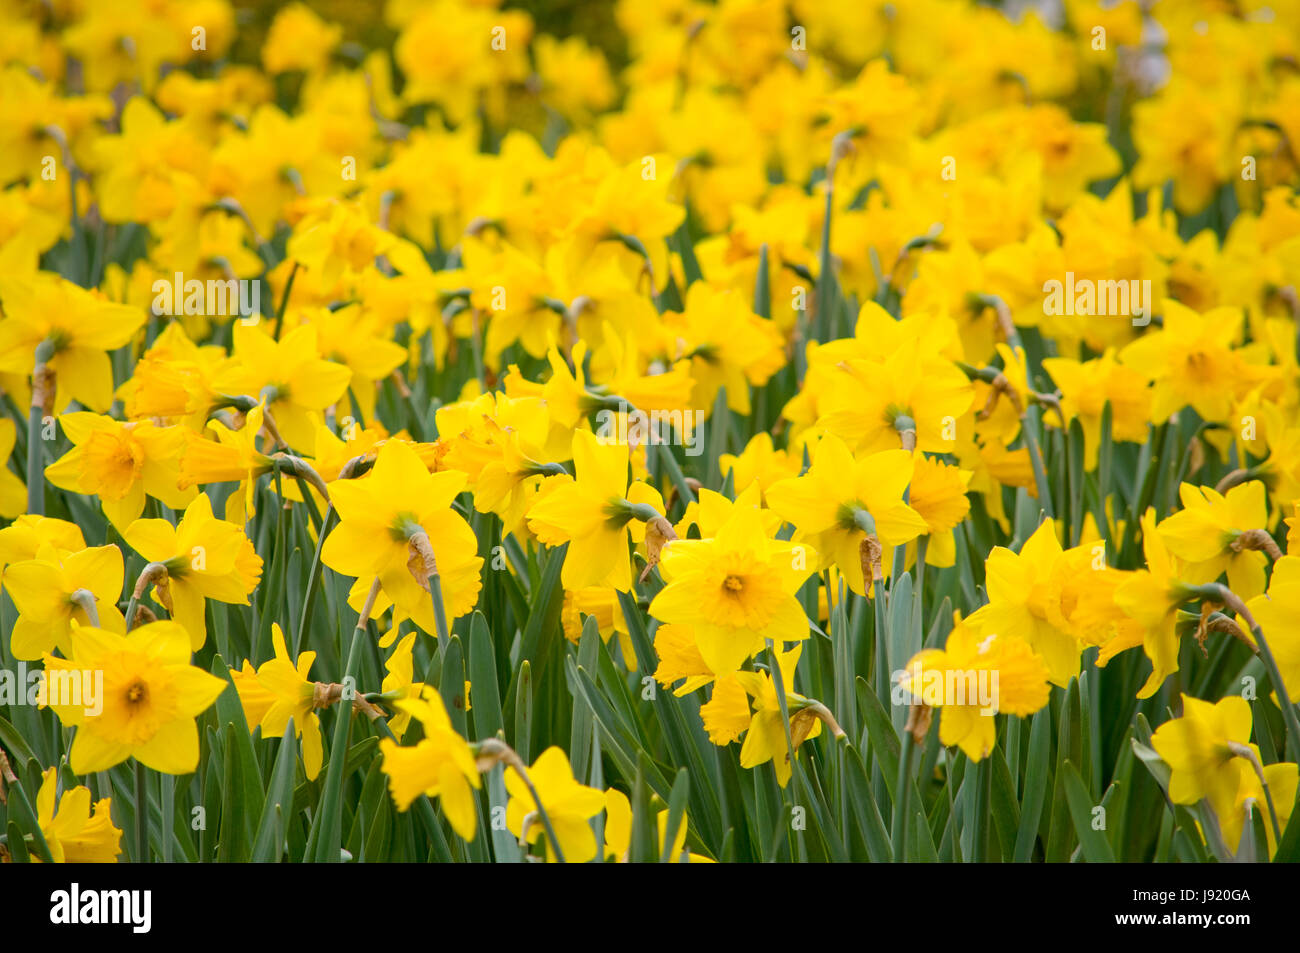 The blooming of the annual tulips and daffodils in Niagara Falls, Ontario, Canada Stock Photo